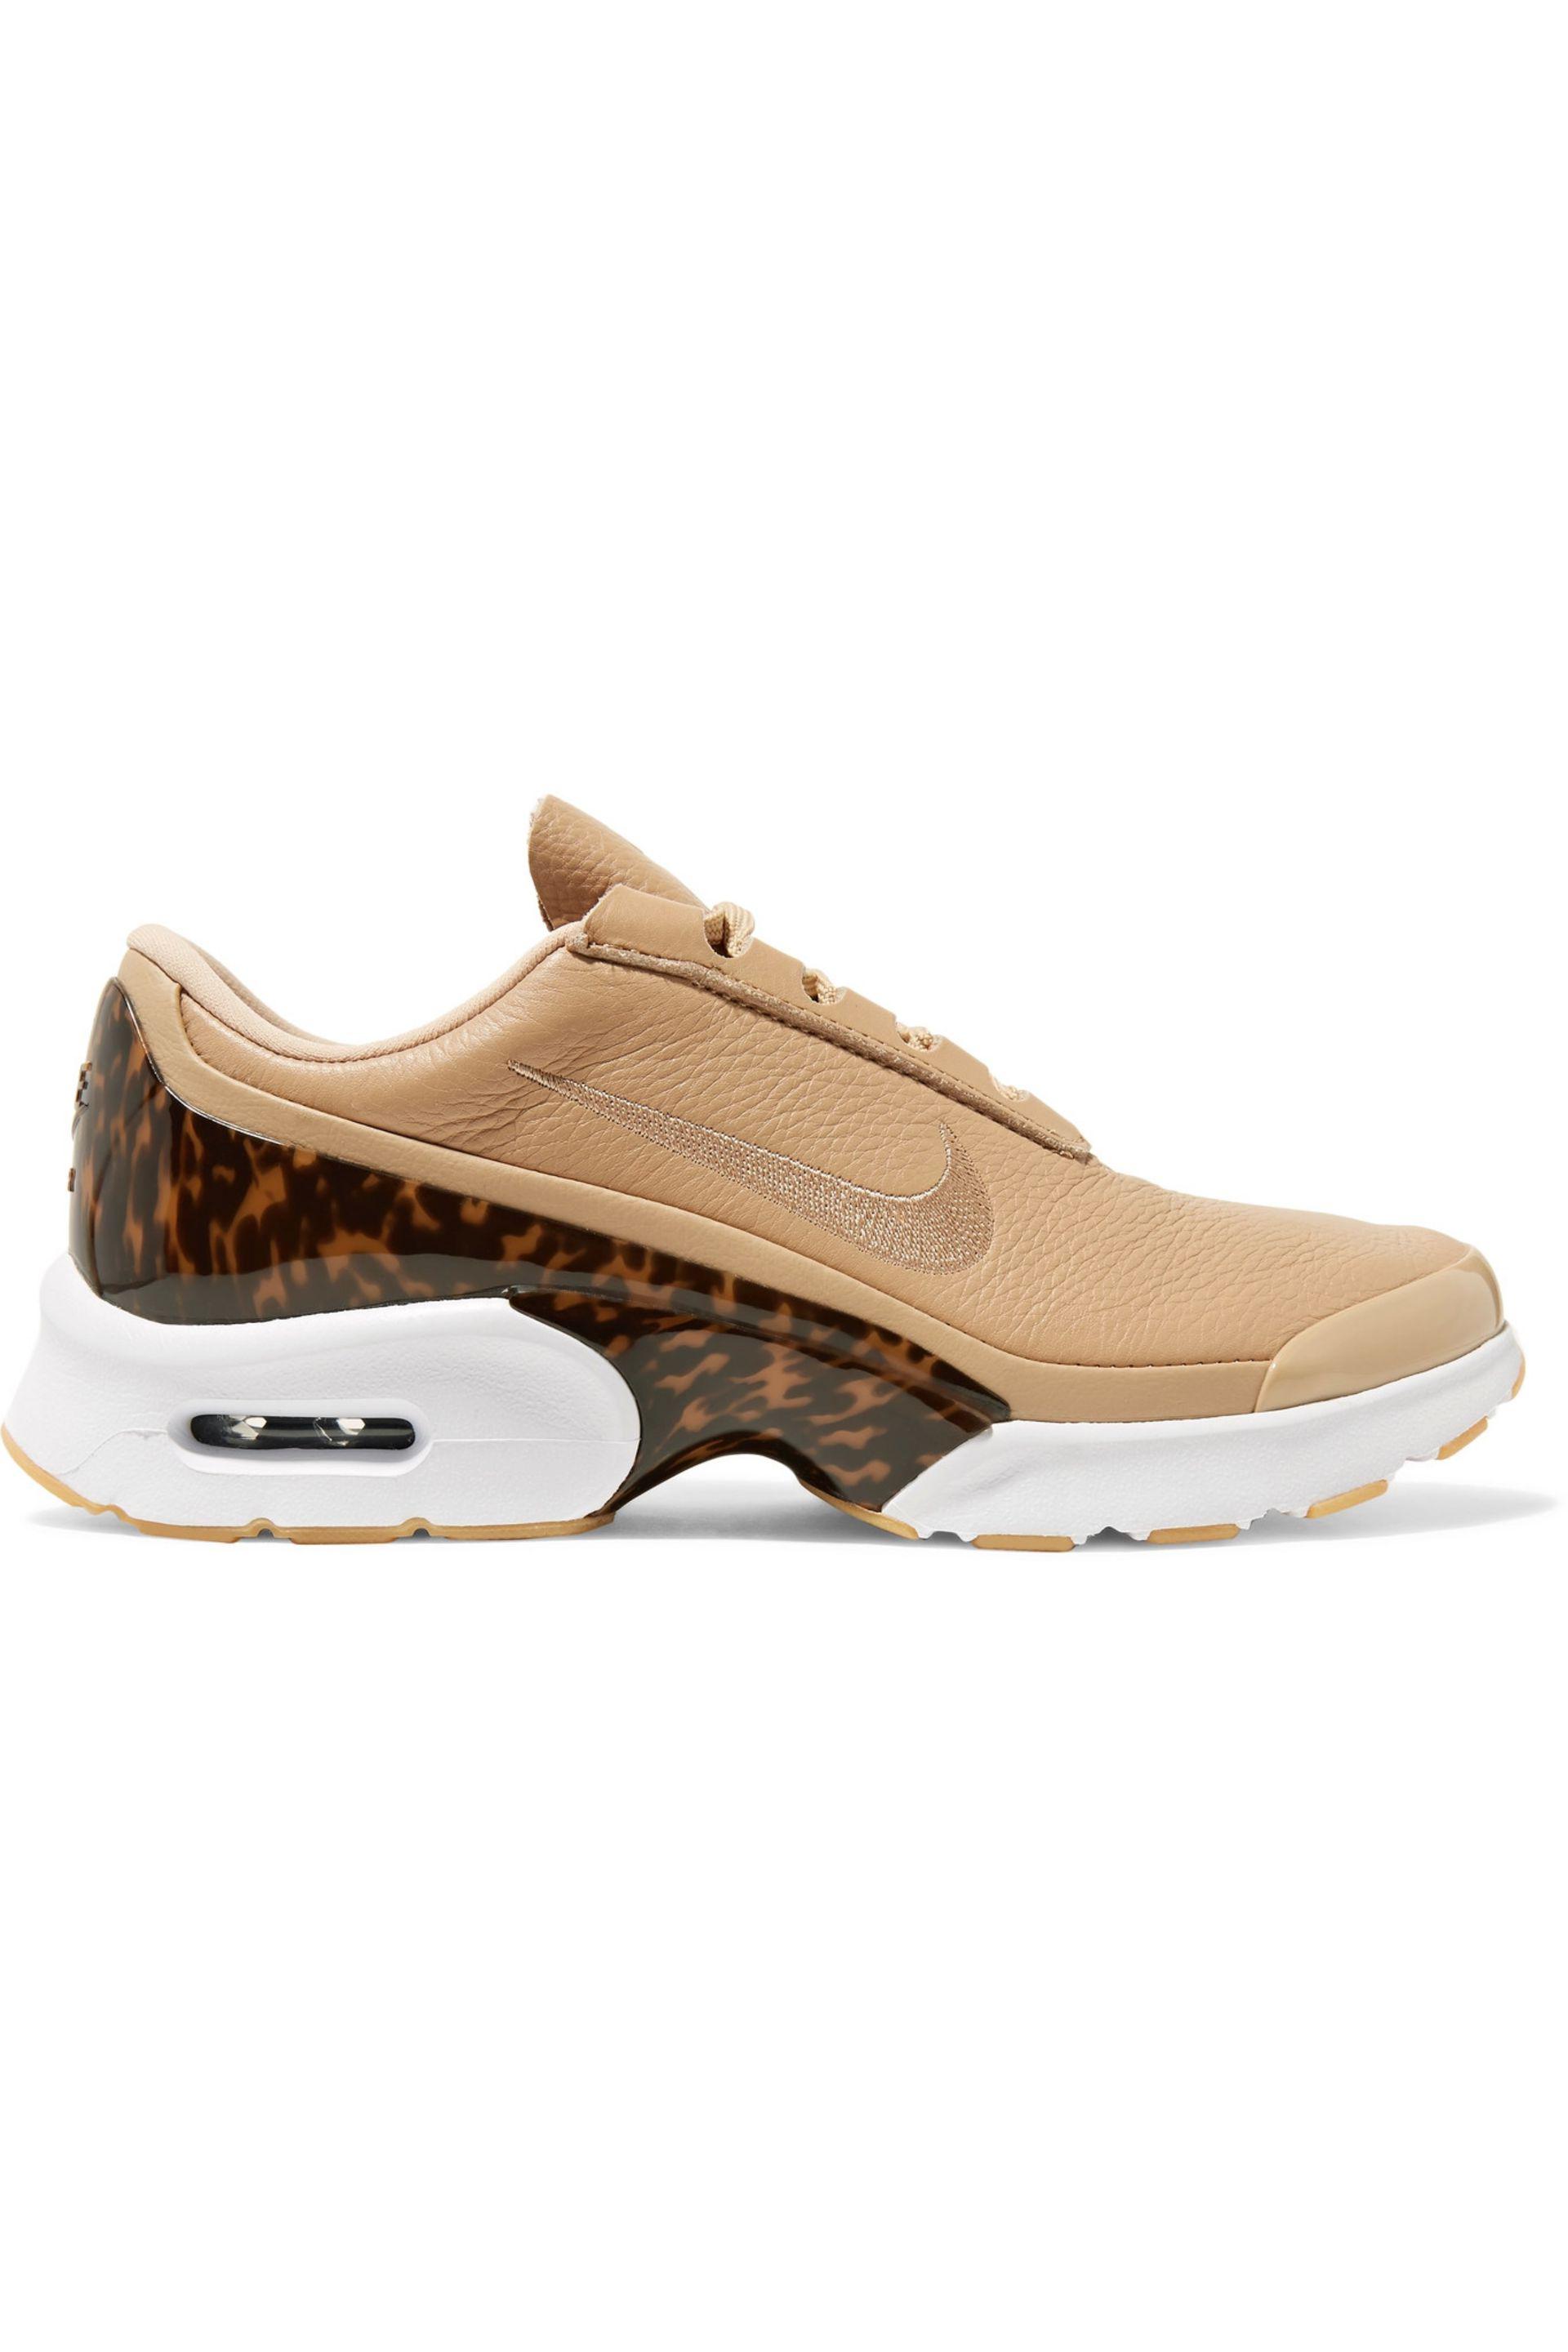 nike air max jewell suede